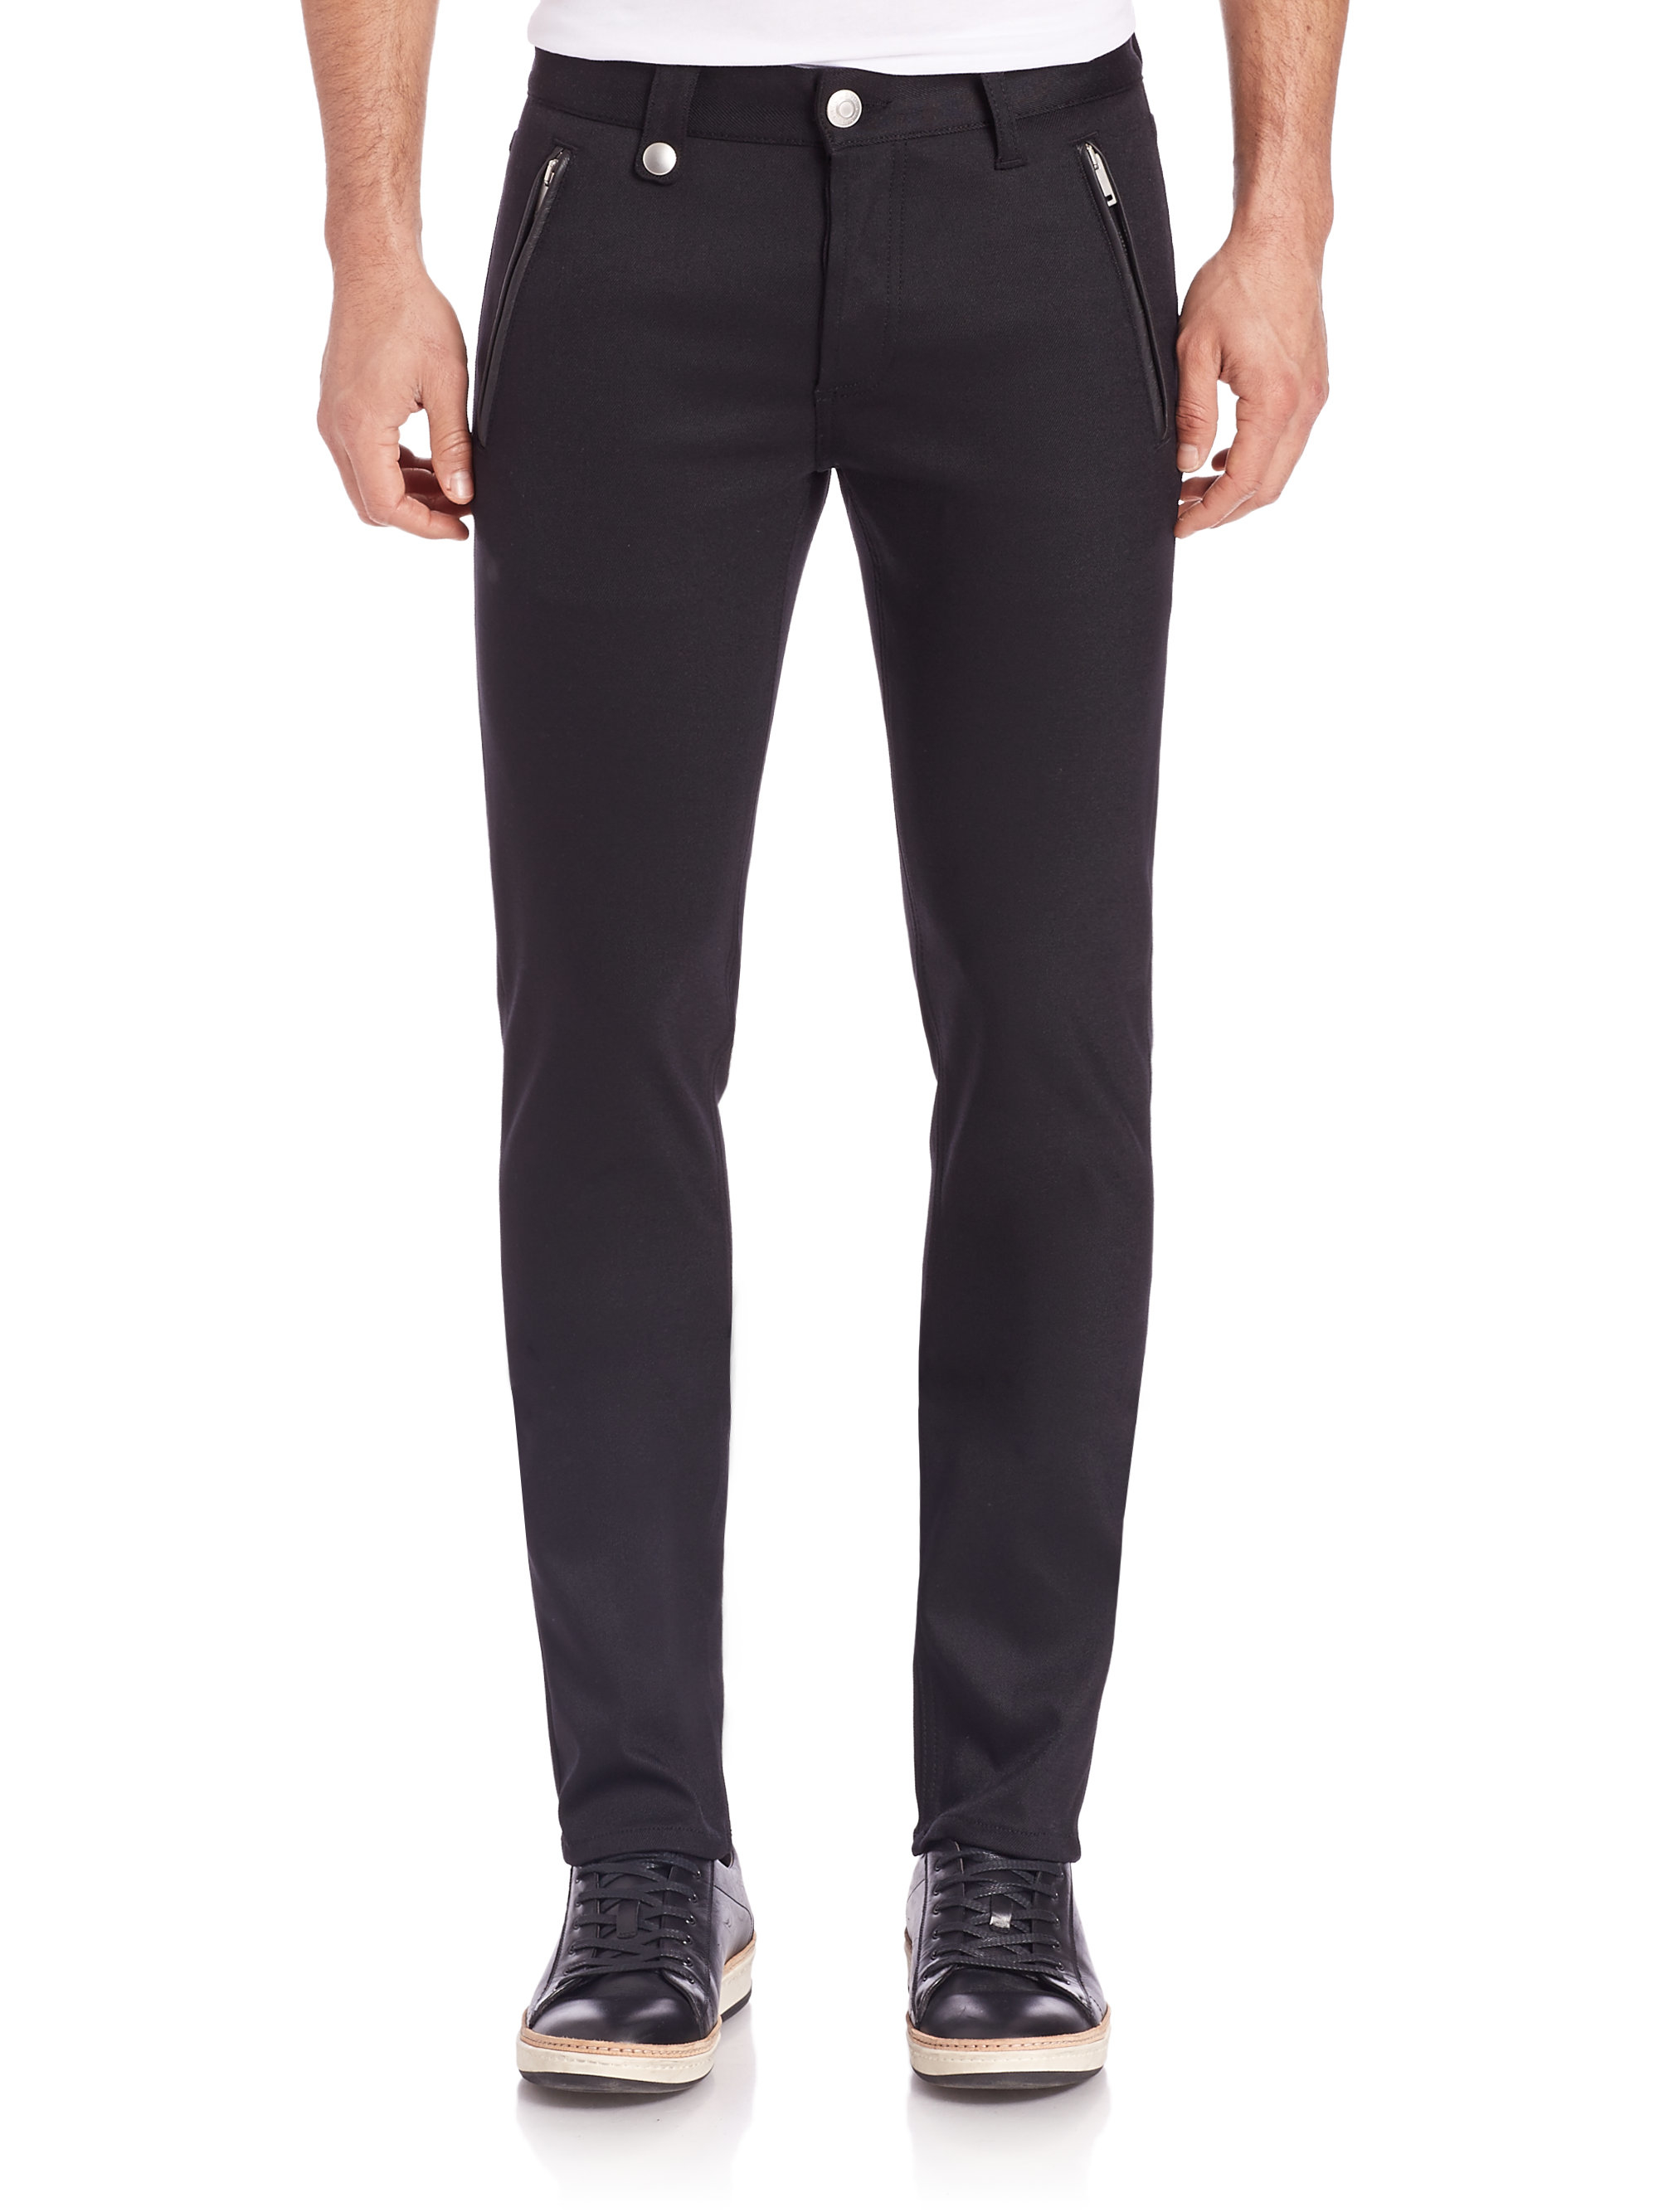 Lyst - Alexander Mcqueen Leather-trimmed Twill Pants in Black for Men